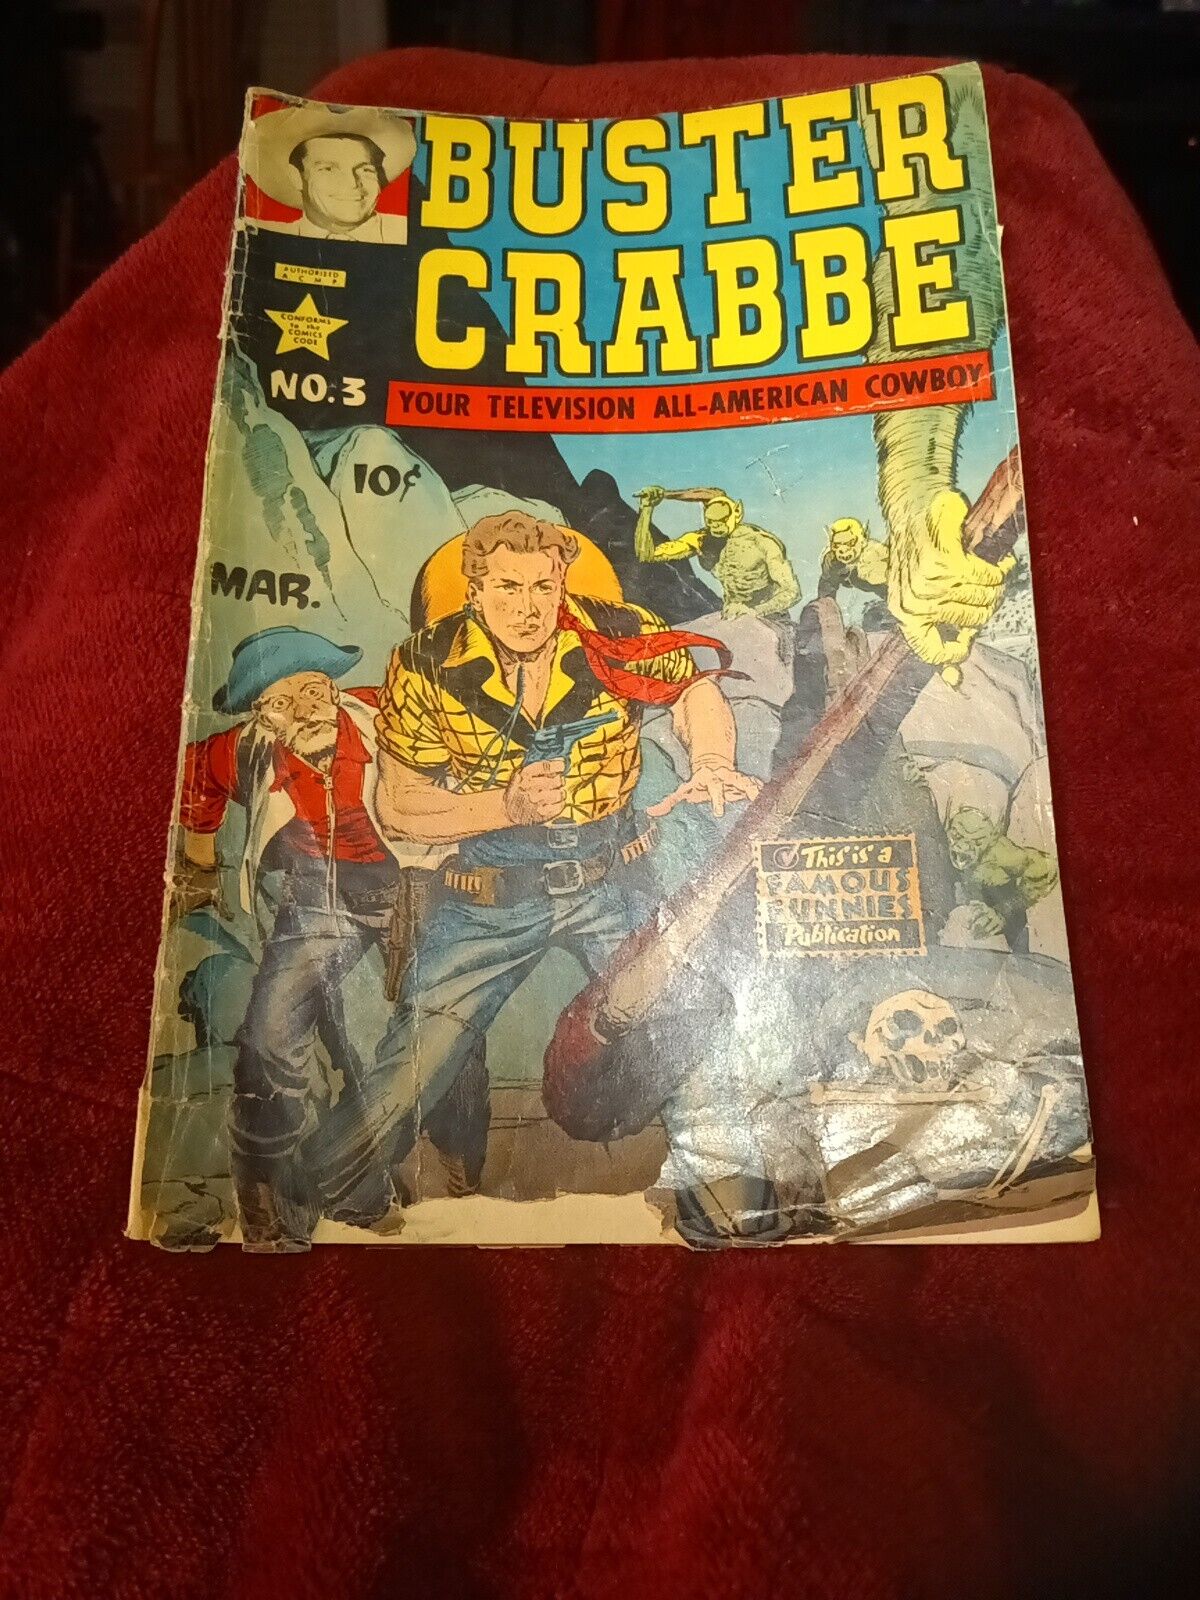 BUSTER CRABBE #3 Golden Age Famous Funnies WILLIAMSON/EVANS Horror Scifi cover